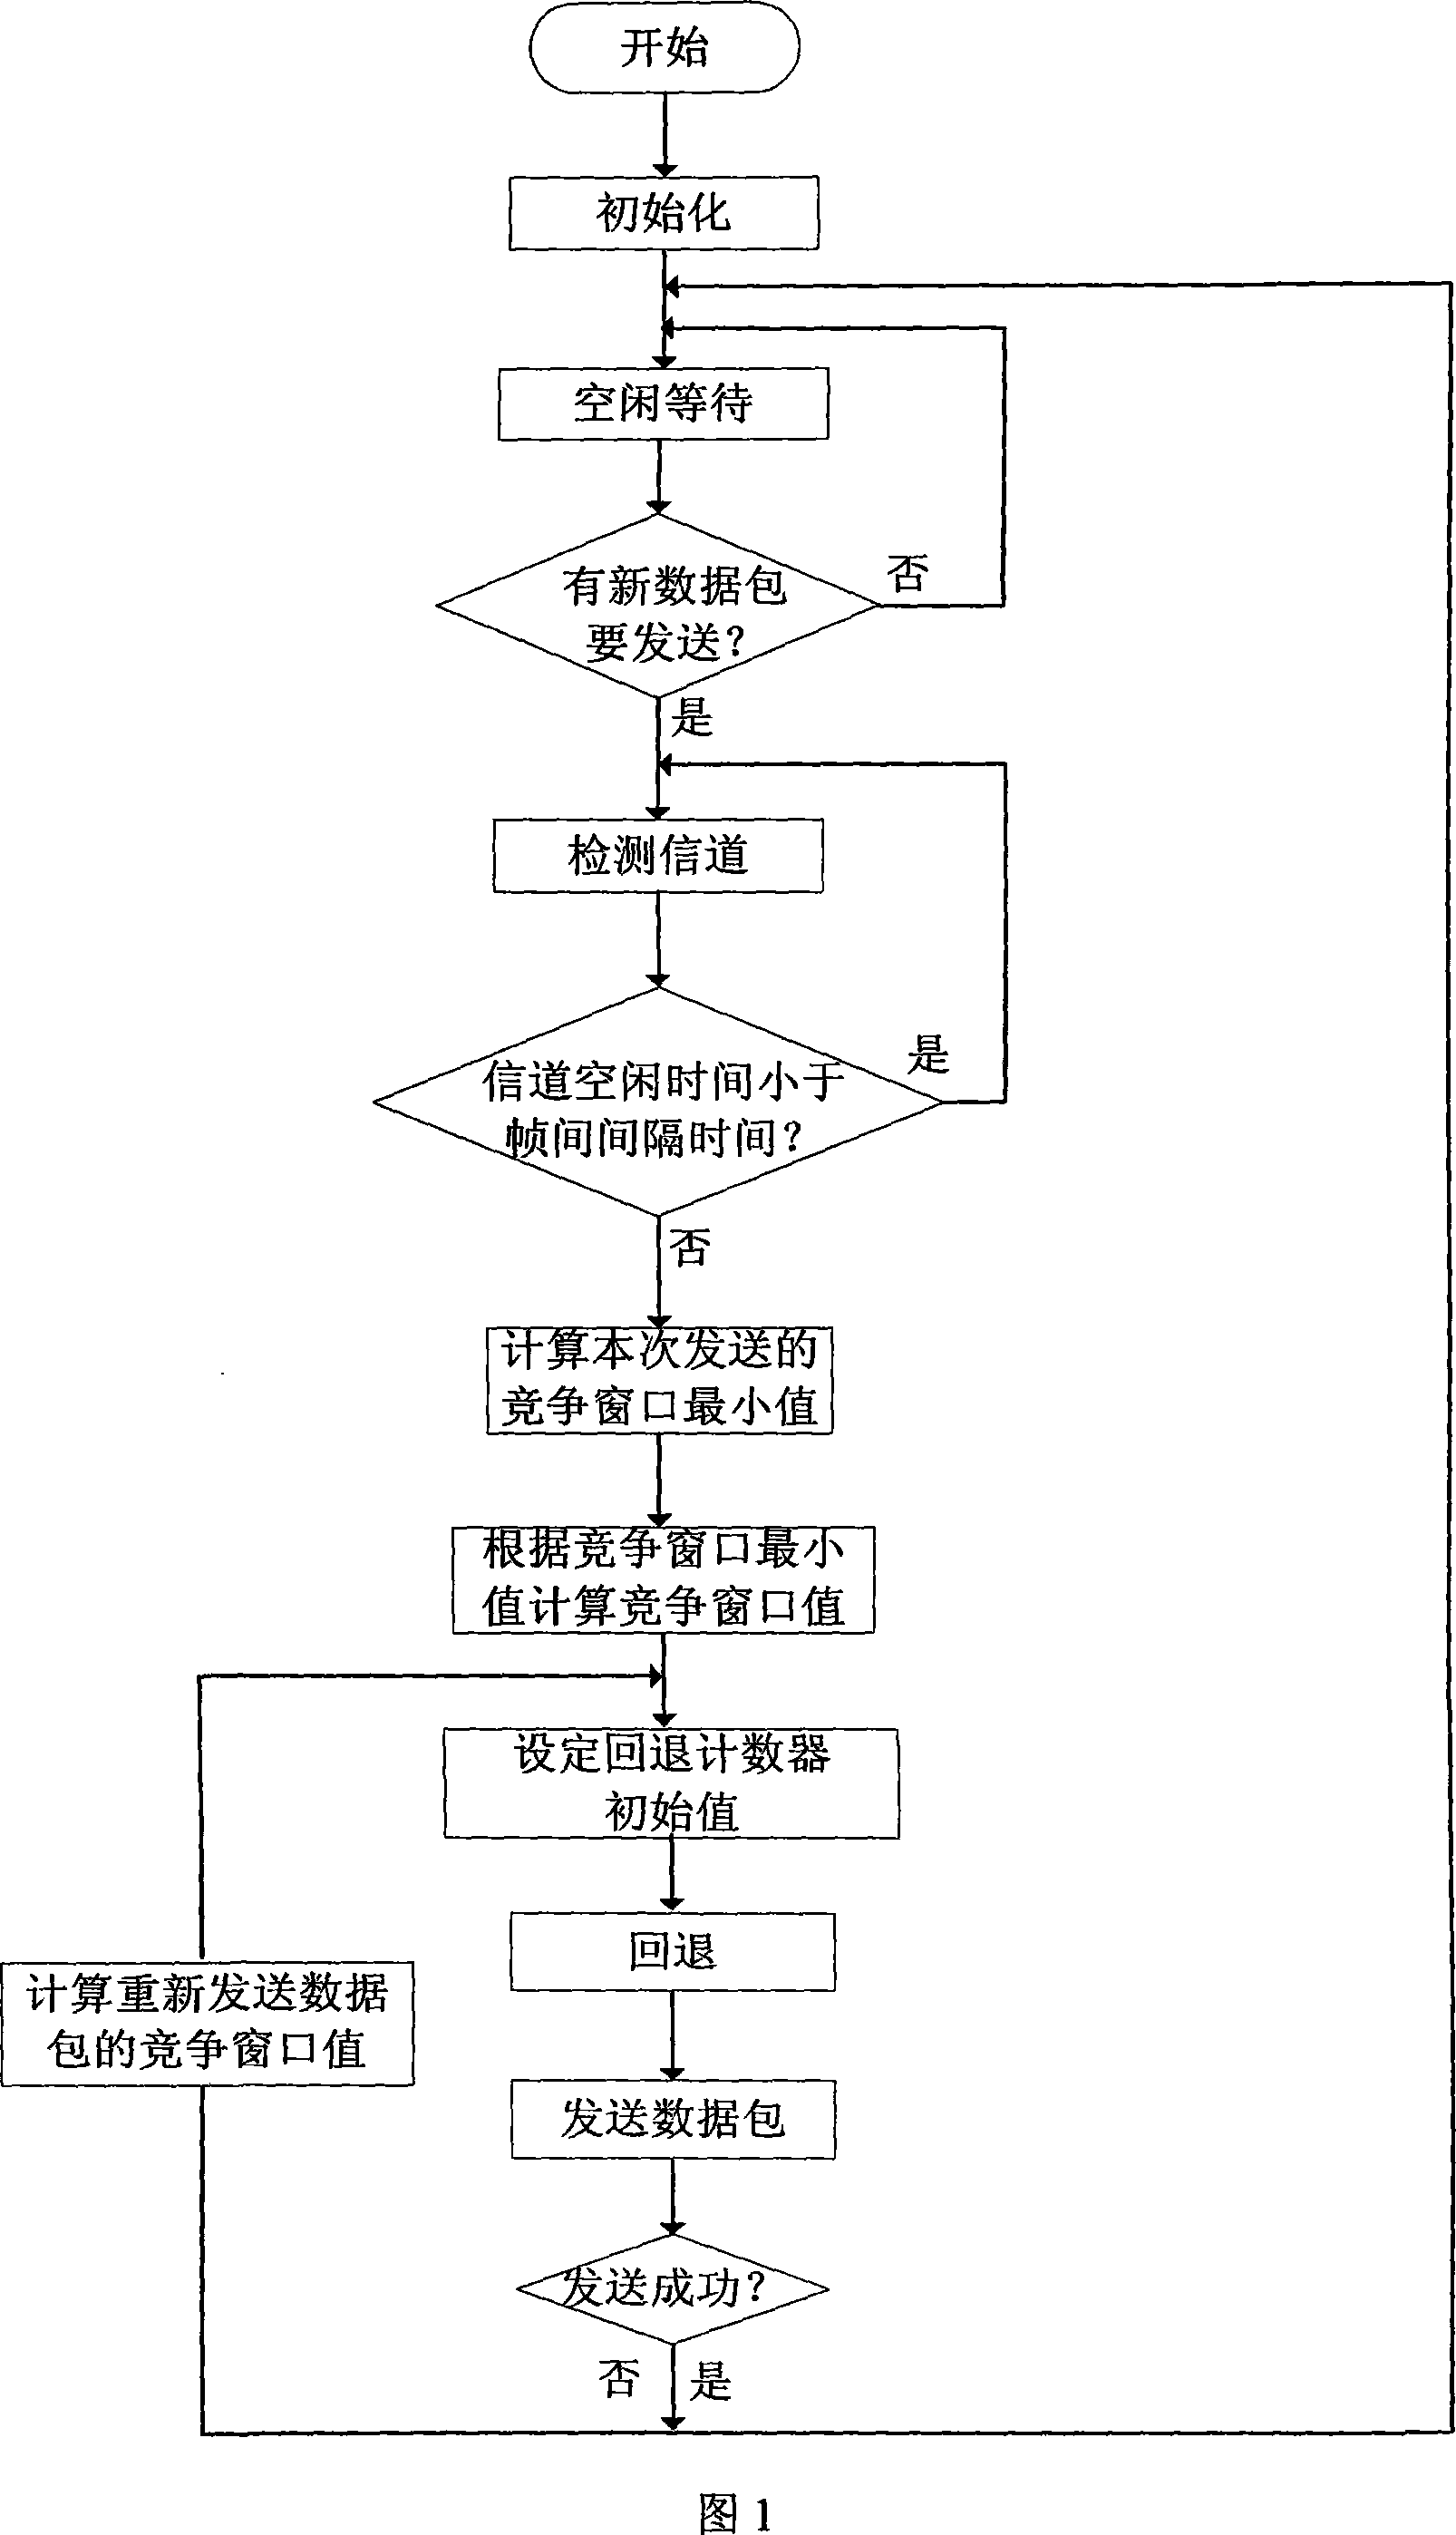 Exponential backspace method for radio local network